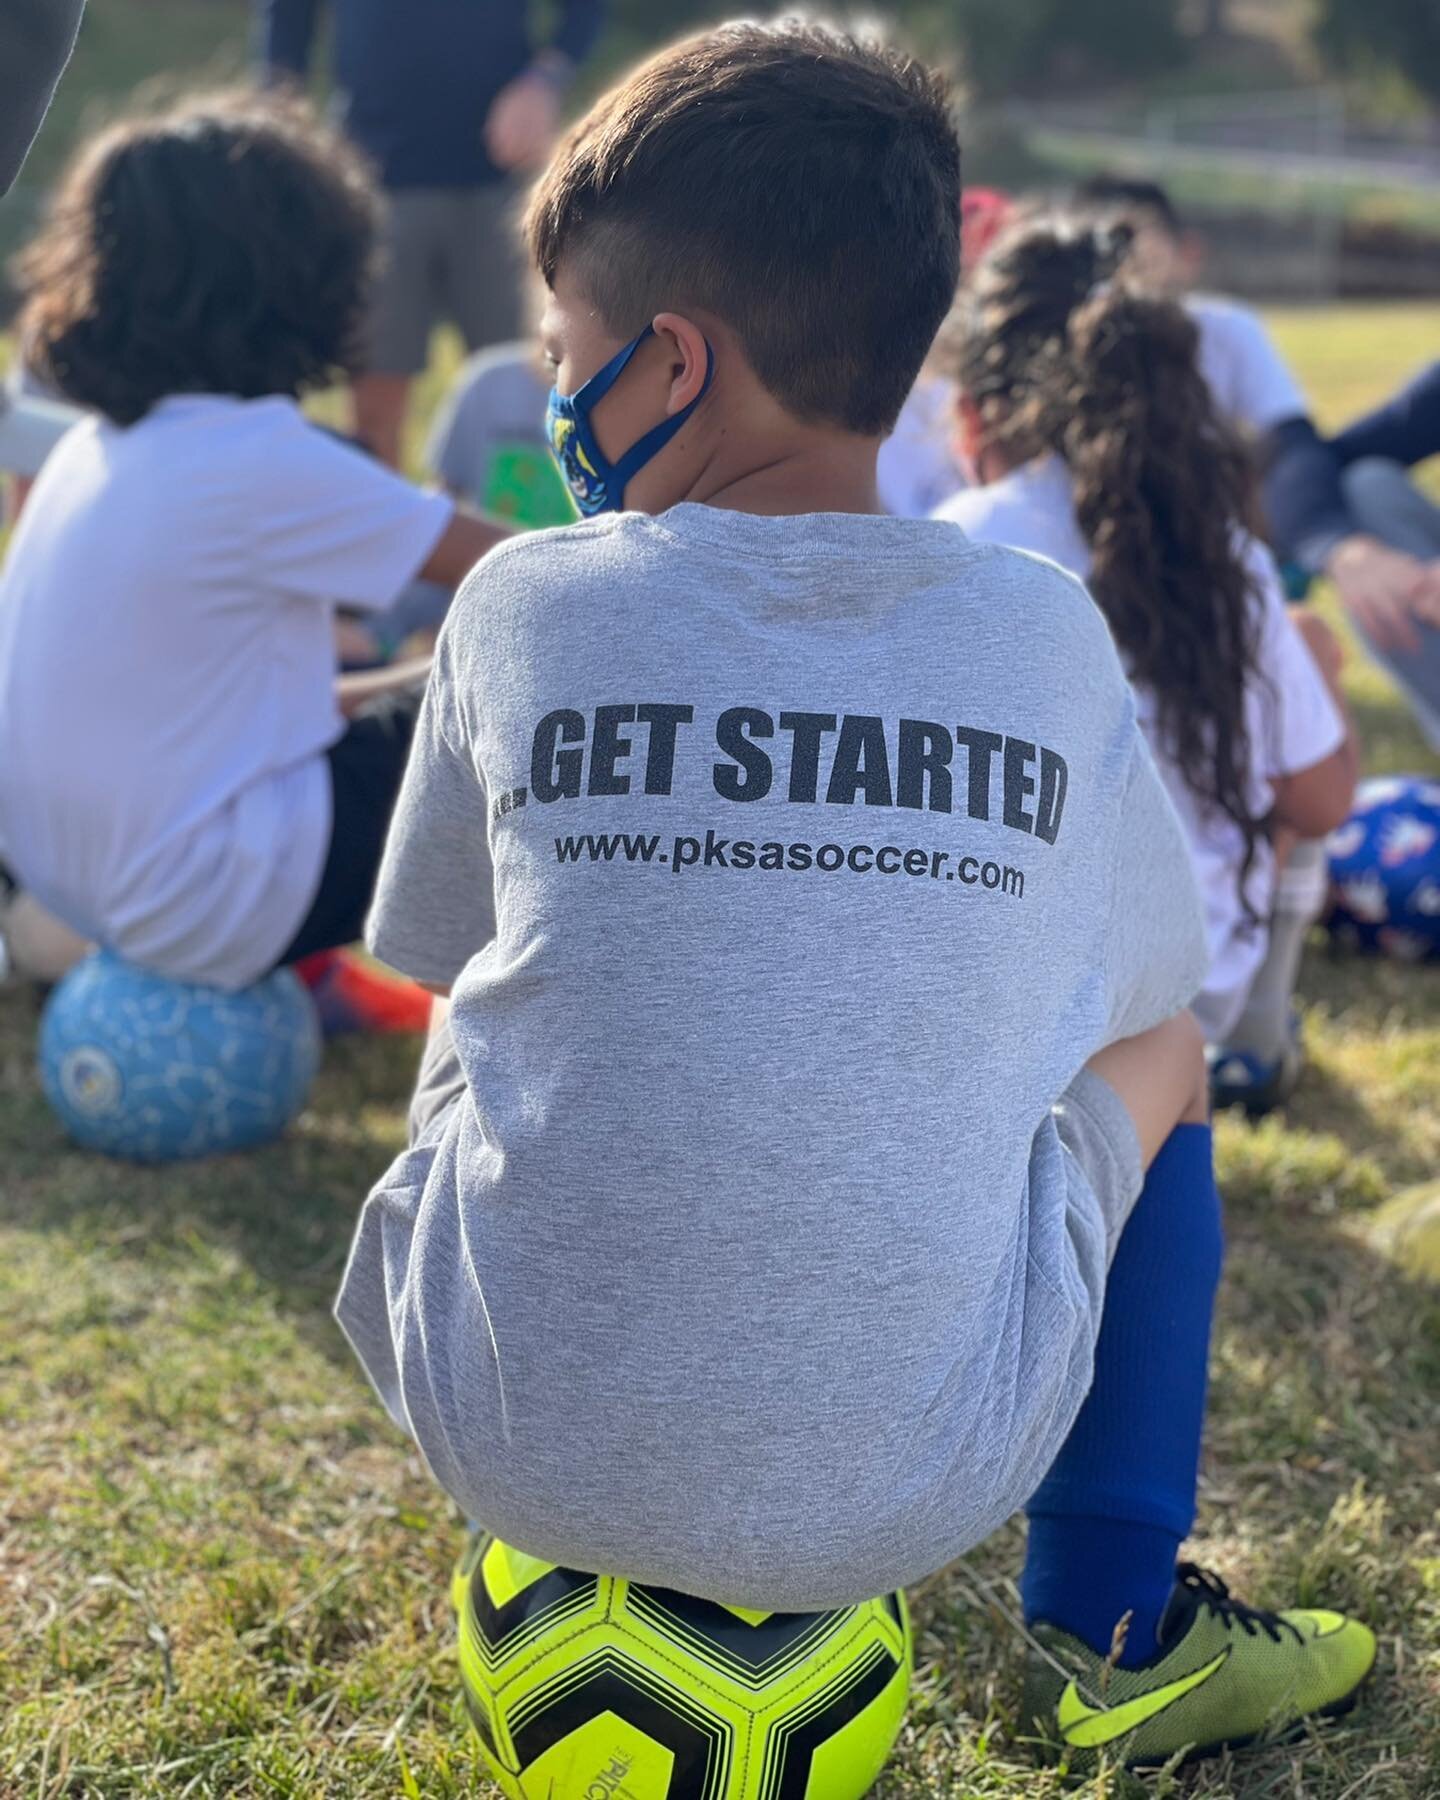 Get started! We invite your littles to train with us in our fall soccer development program, Tomorrow&rsquo;s Stars. We had an awesome 1st session and our 2nd session begins August 2nd. We offer classes in the South Bay every Monday and Friday from 4